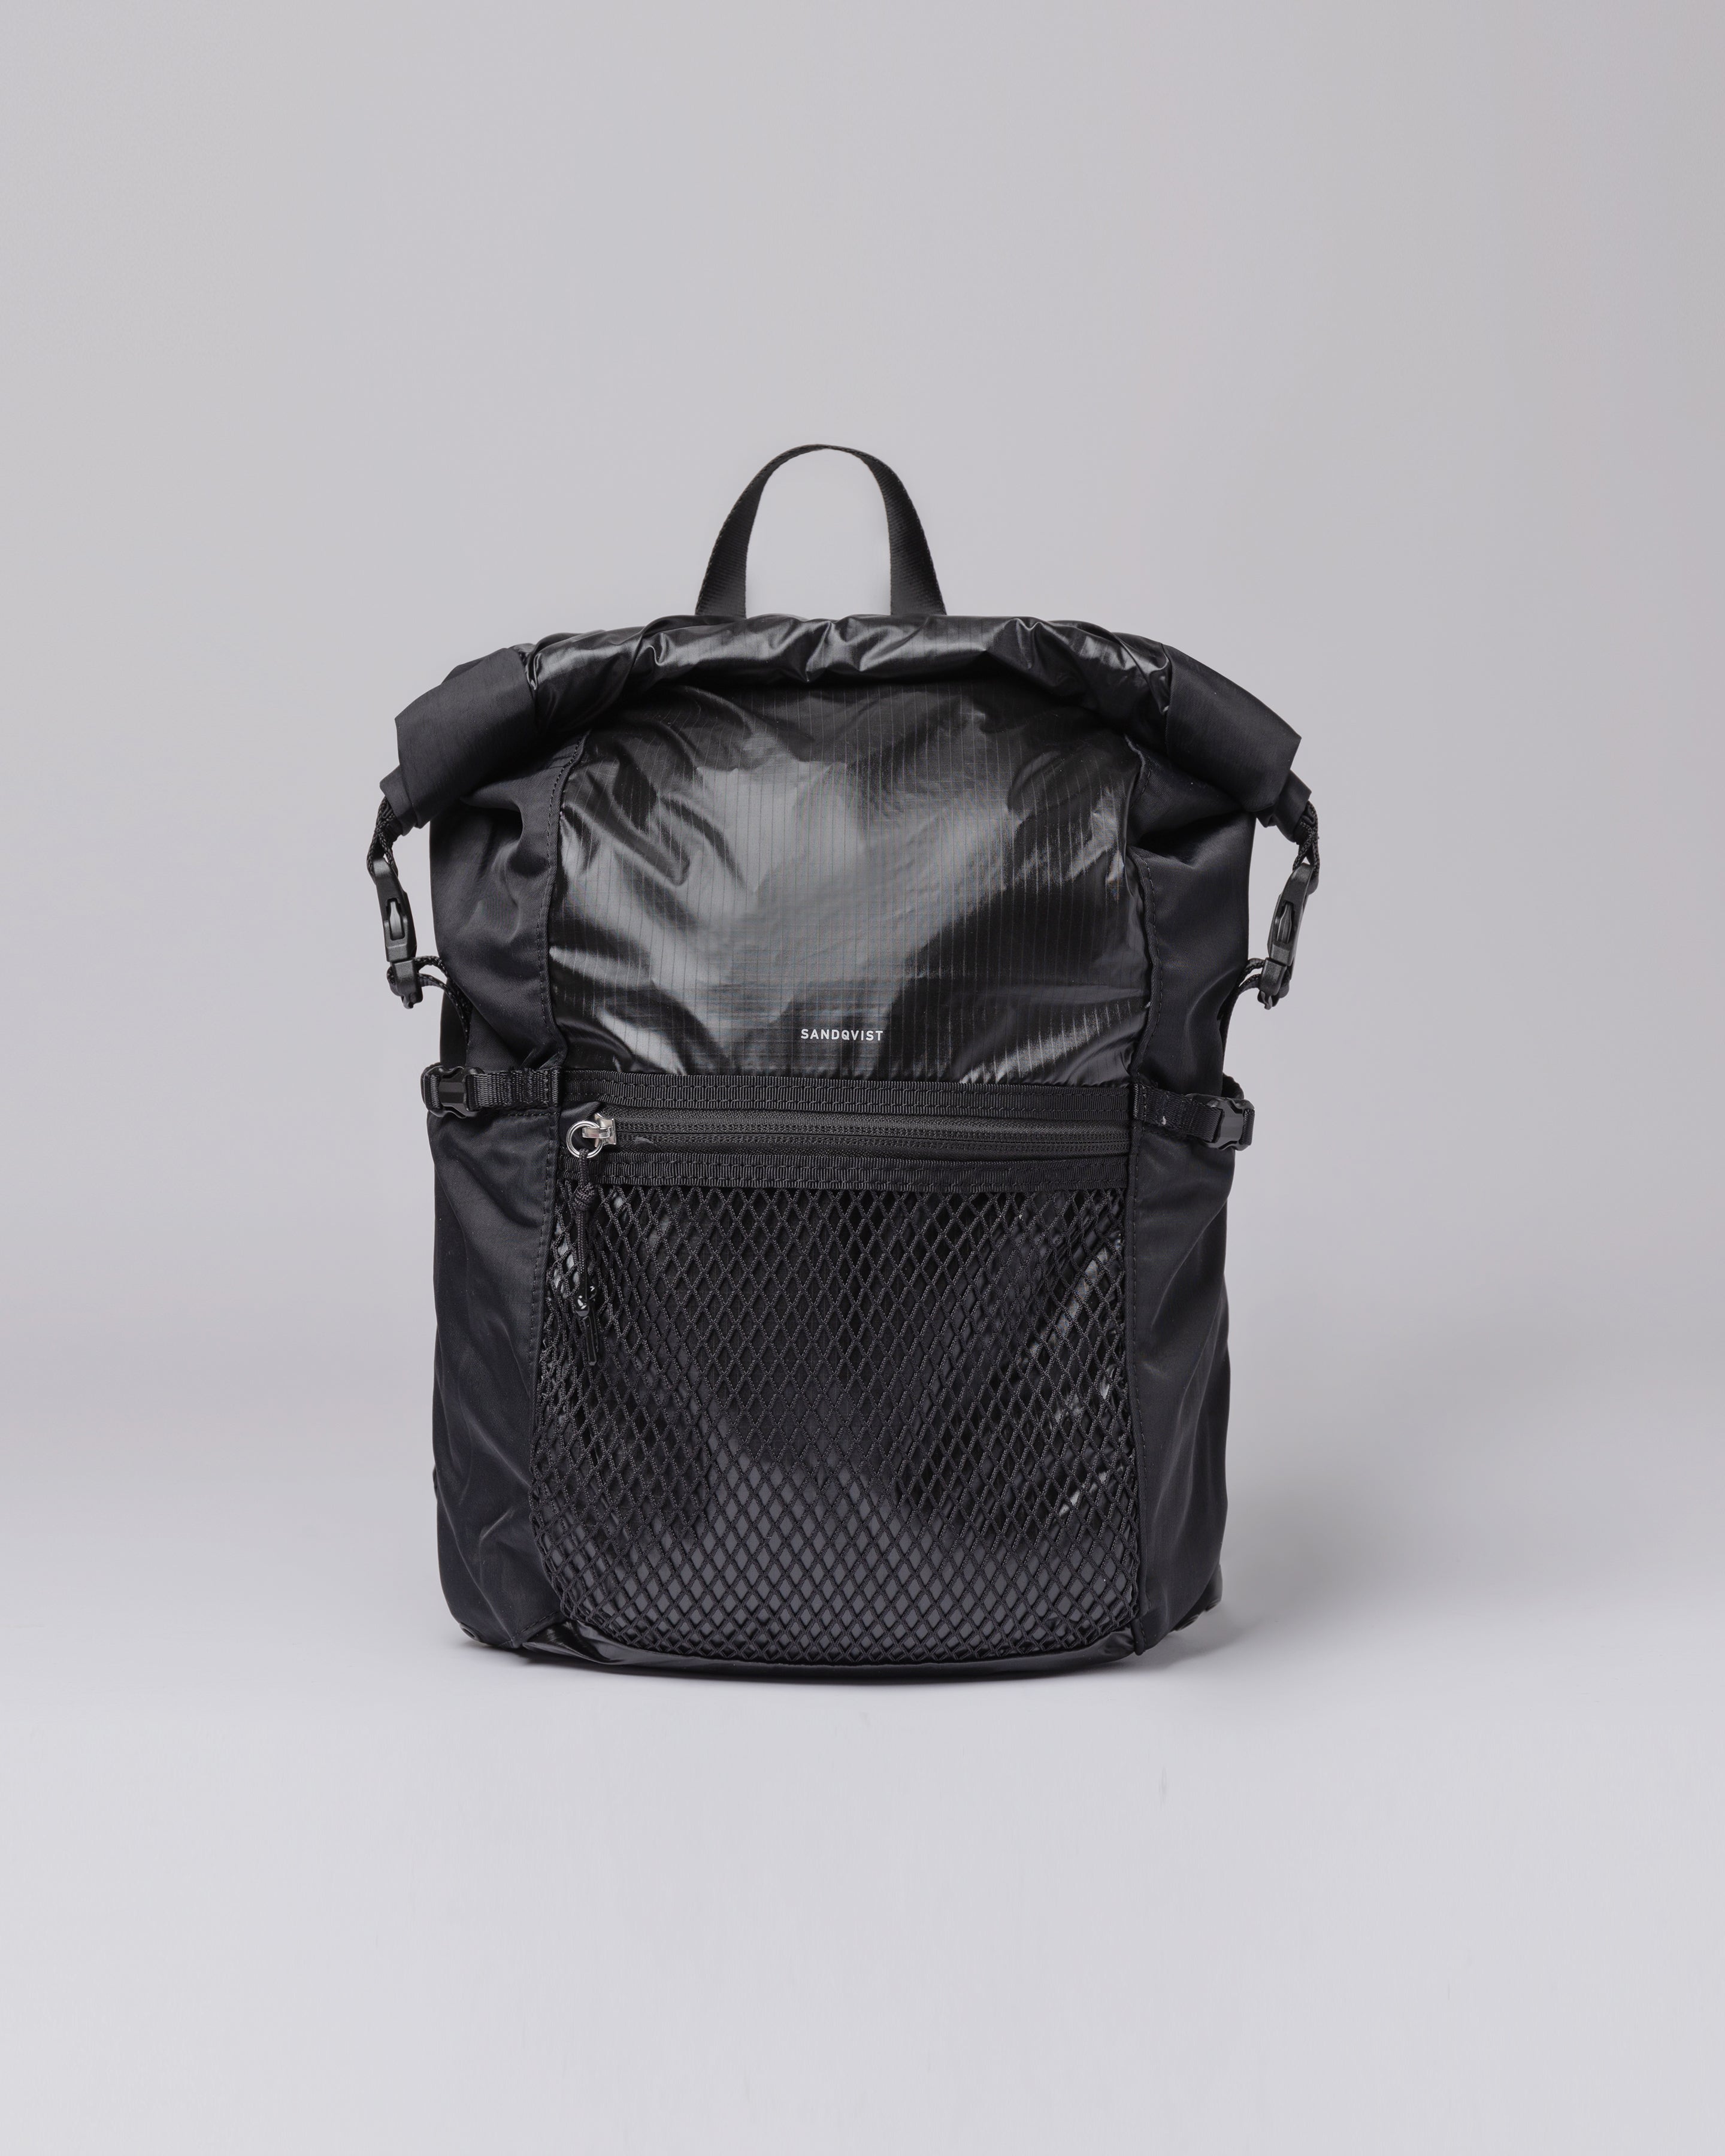 Sandqvist Noa Backpack in Black SQA2008 | Shop from eightywingold an official brand partner for Sandqvist Canada and US.